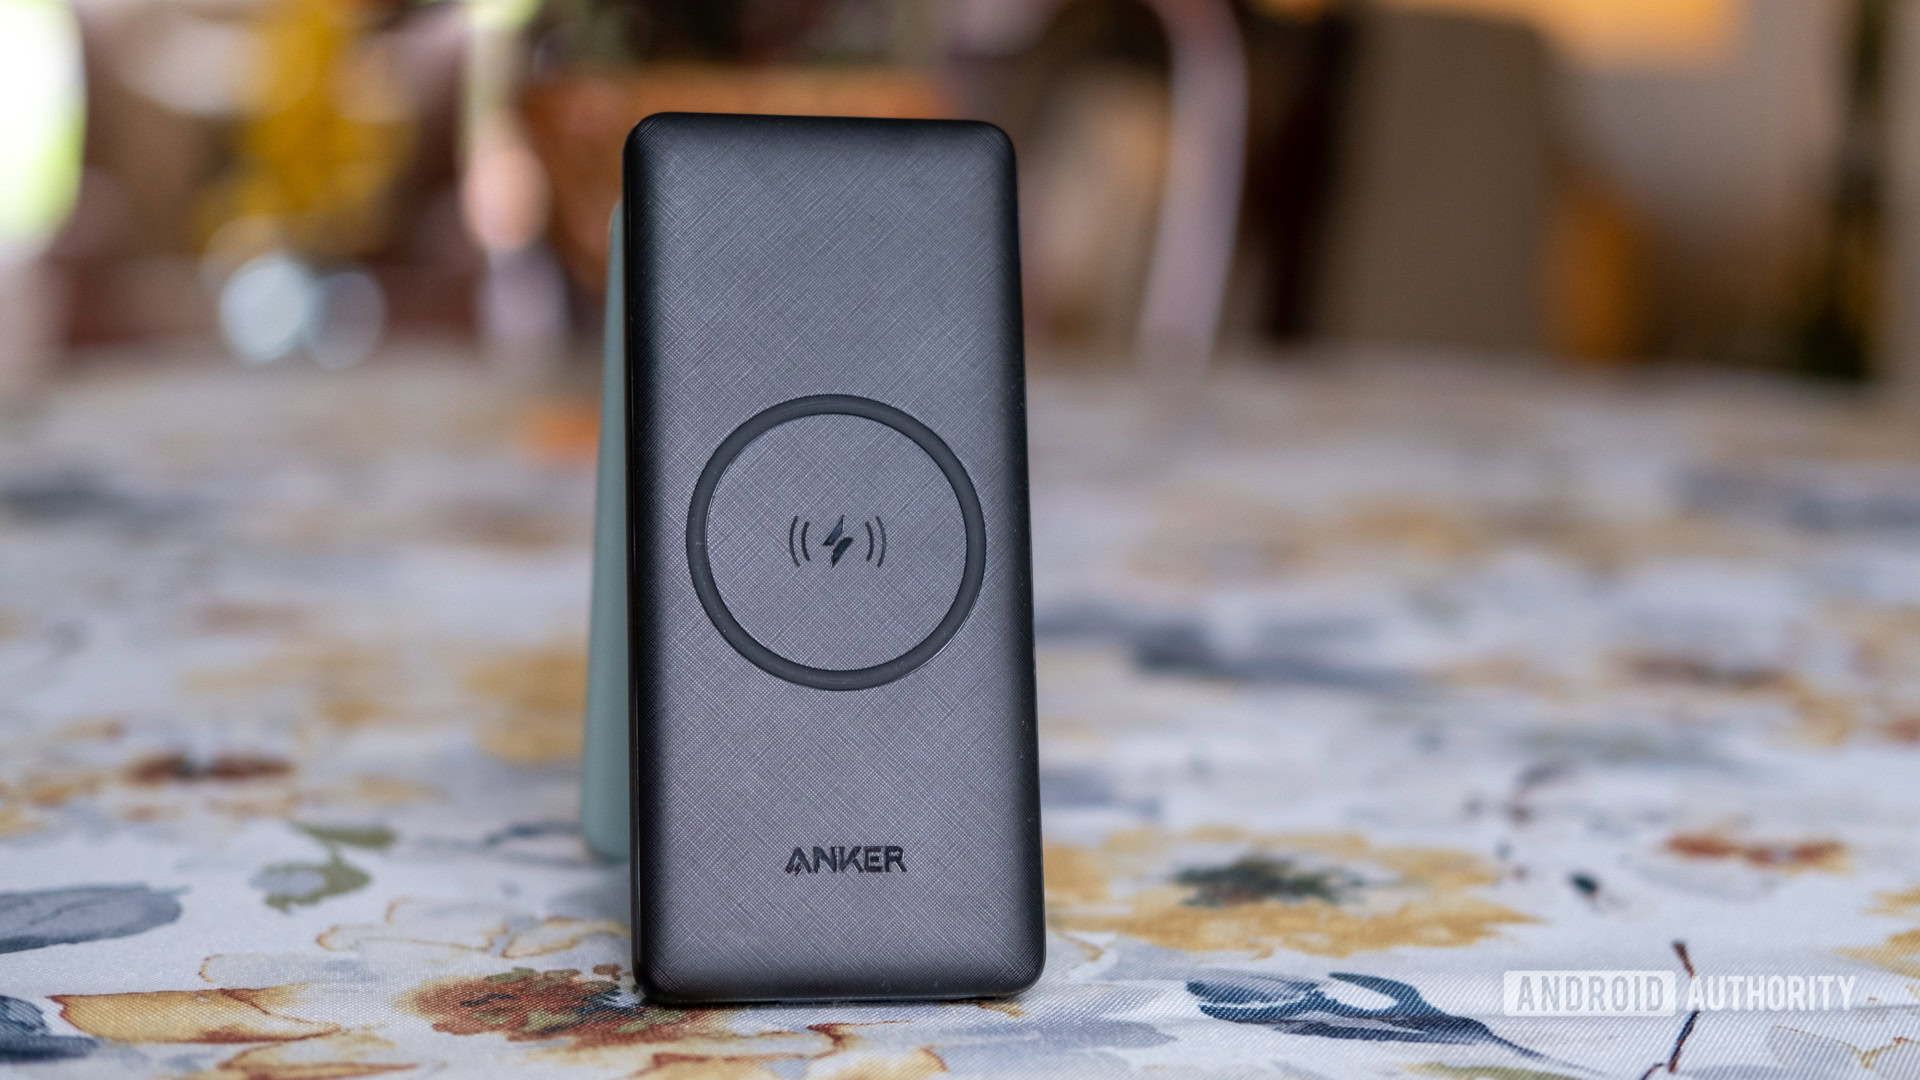 Anker PowerCore III review: in moderation